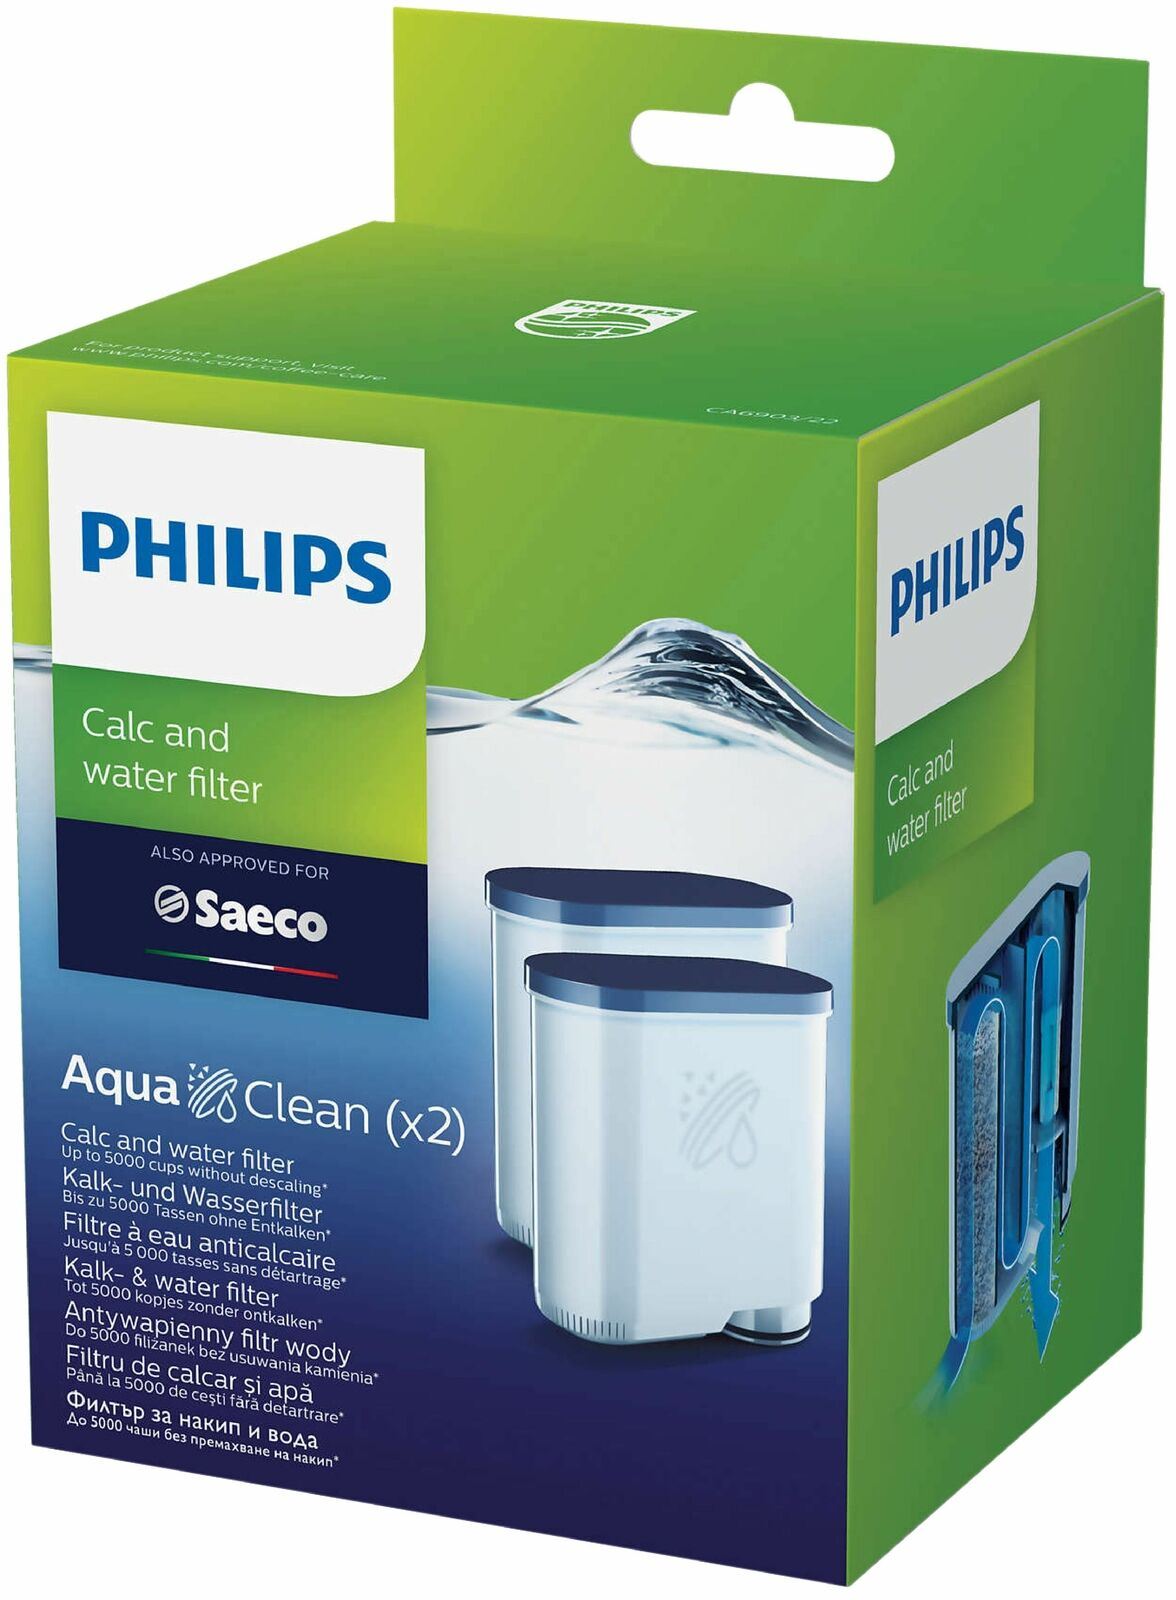 Lot of 2 Philips Saeco CA6903/10 Aqua Clean Water Filter Expresso Machine  NEW